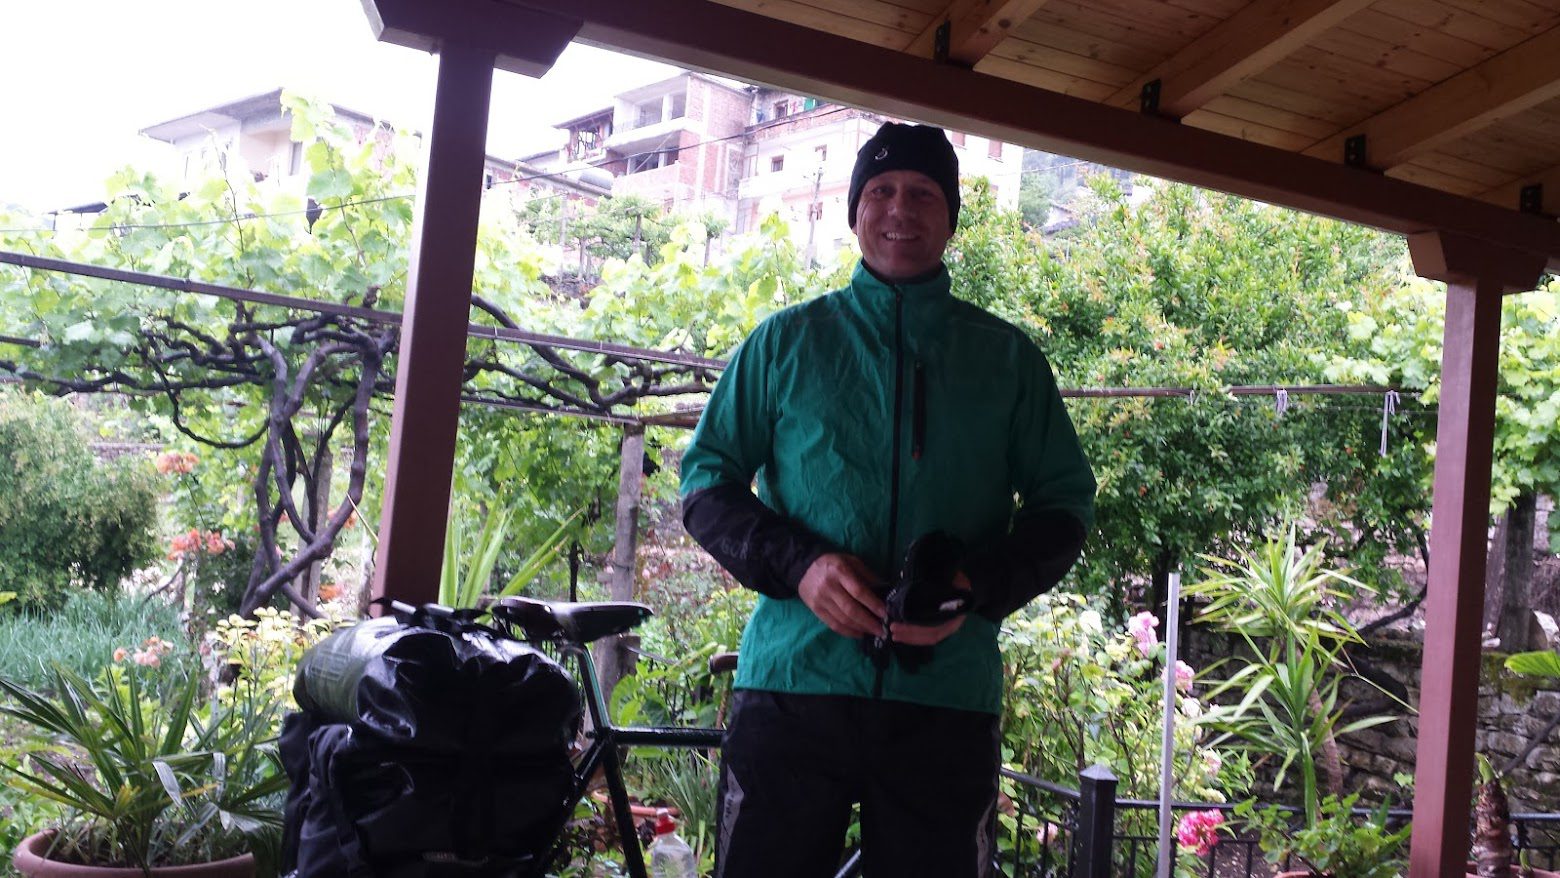 Dave Briggs from Dave's Travel Pages getting ready to cycle in the rain in Albania